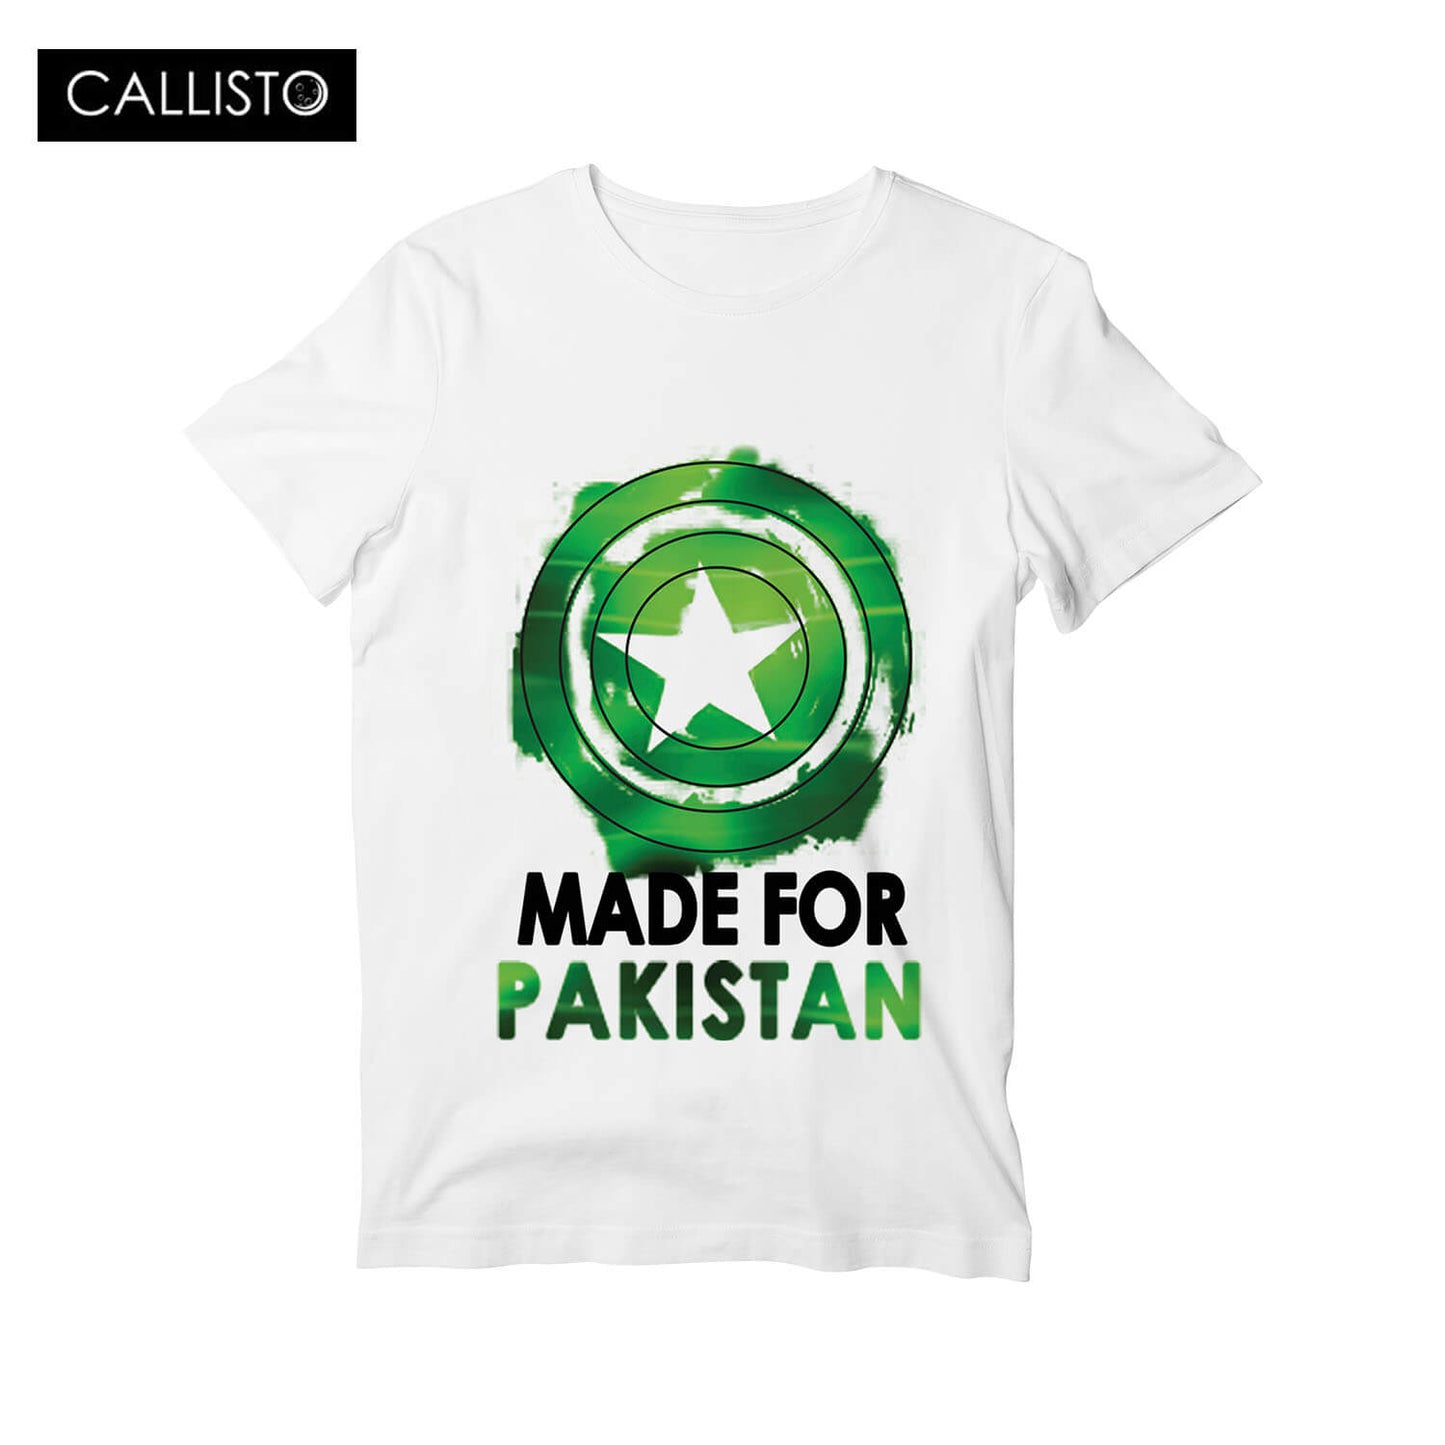 Azadi Collection - Made for Pakistan Tee